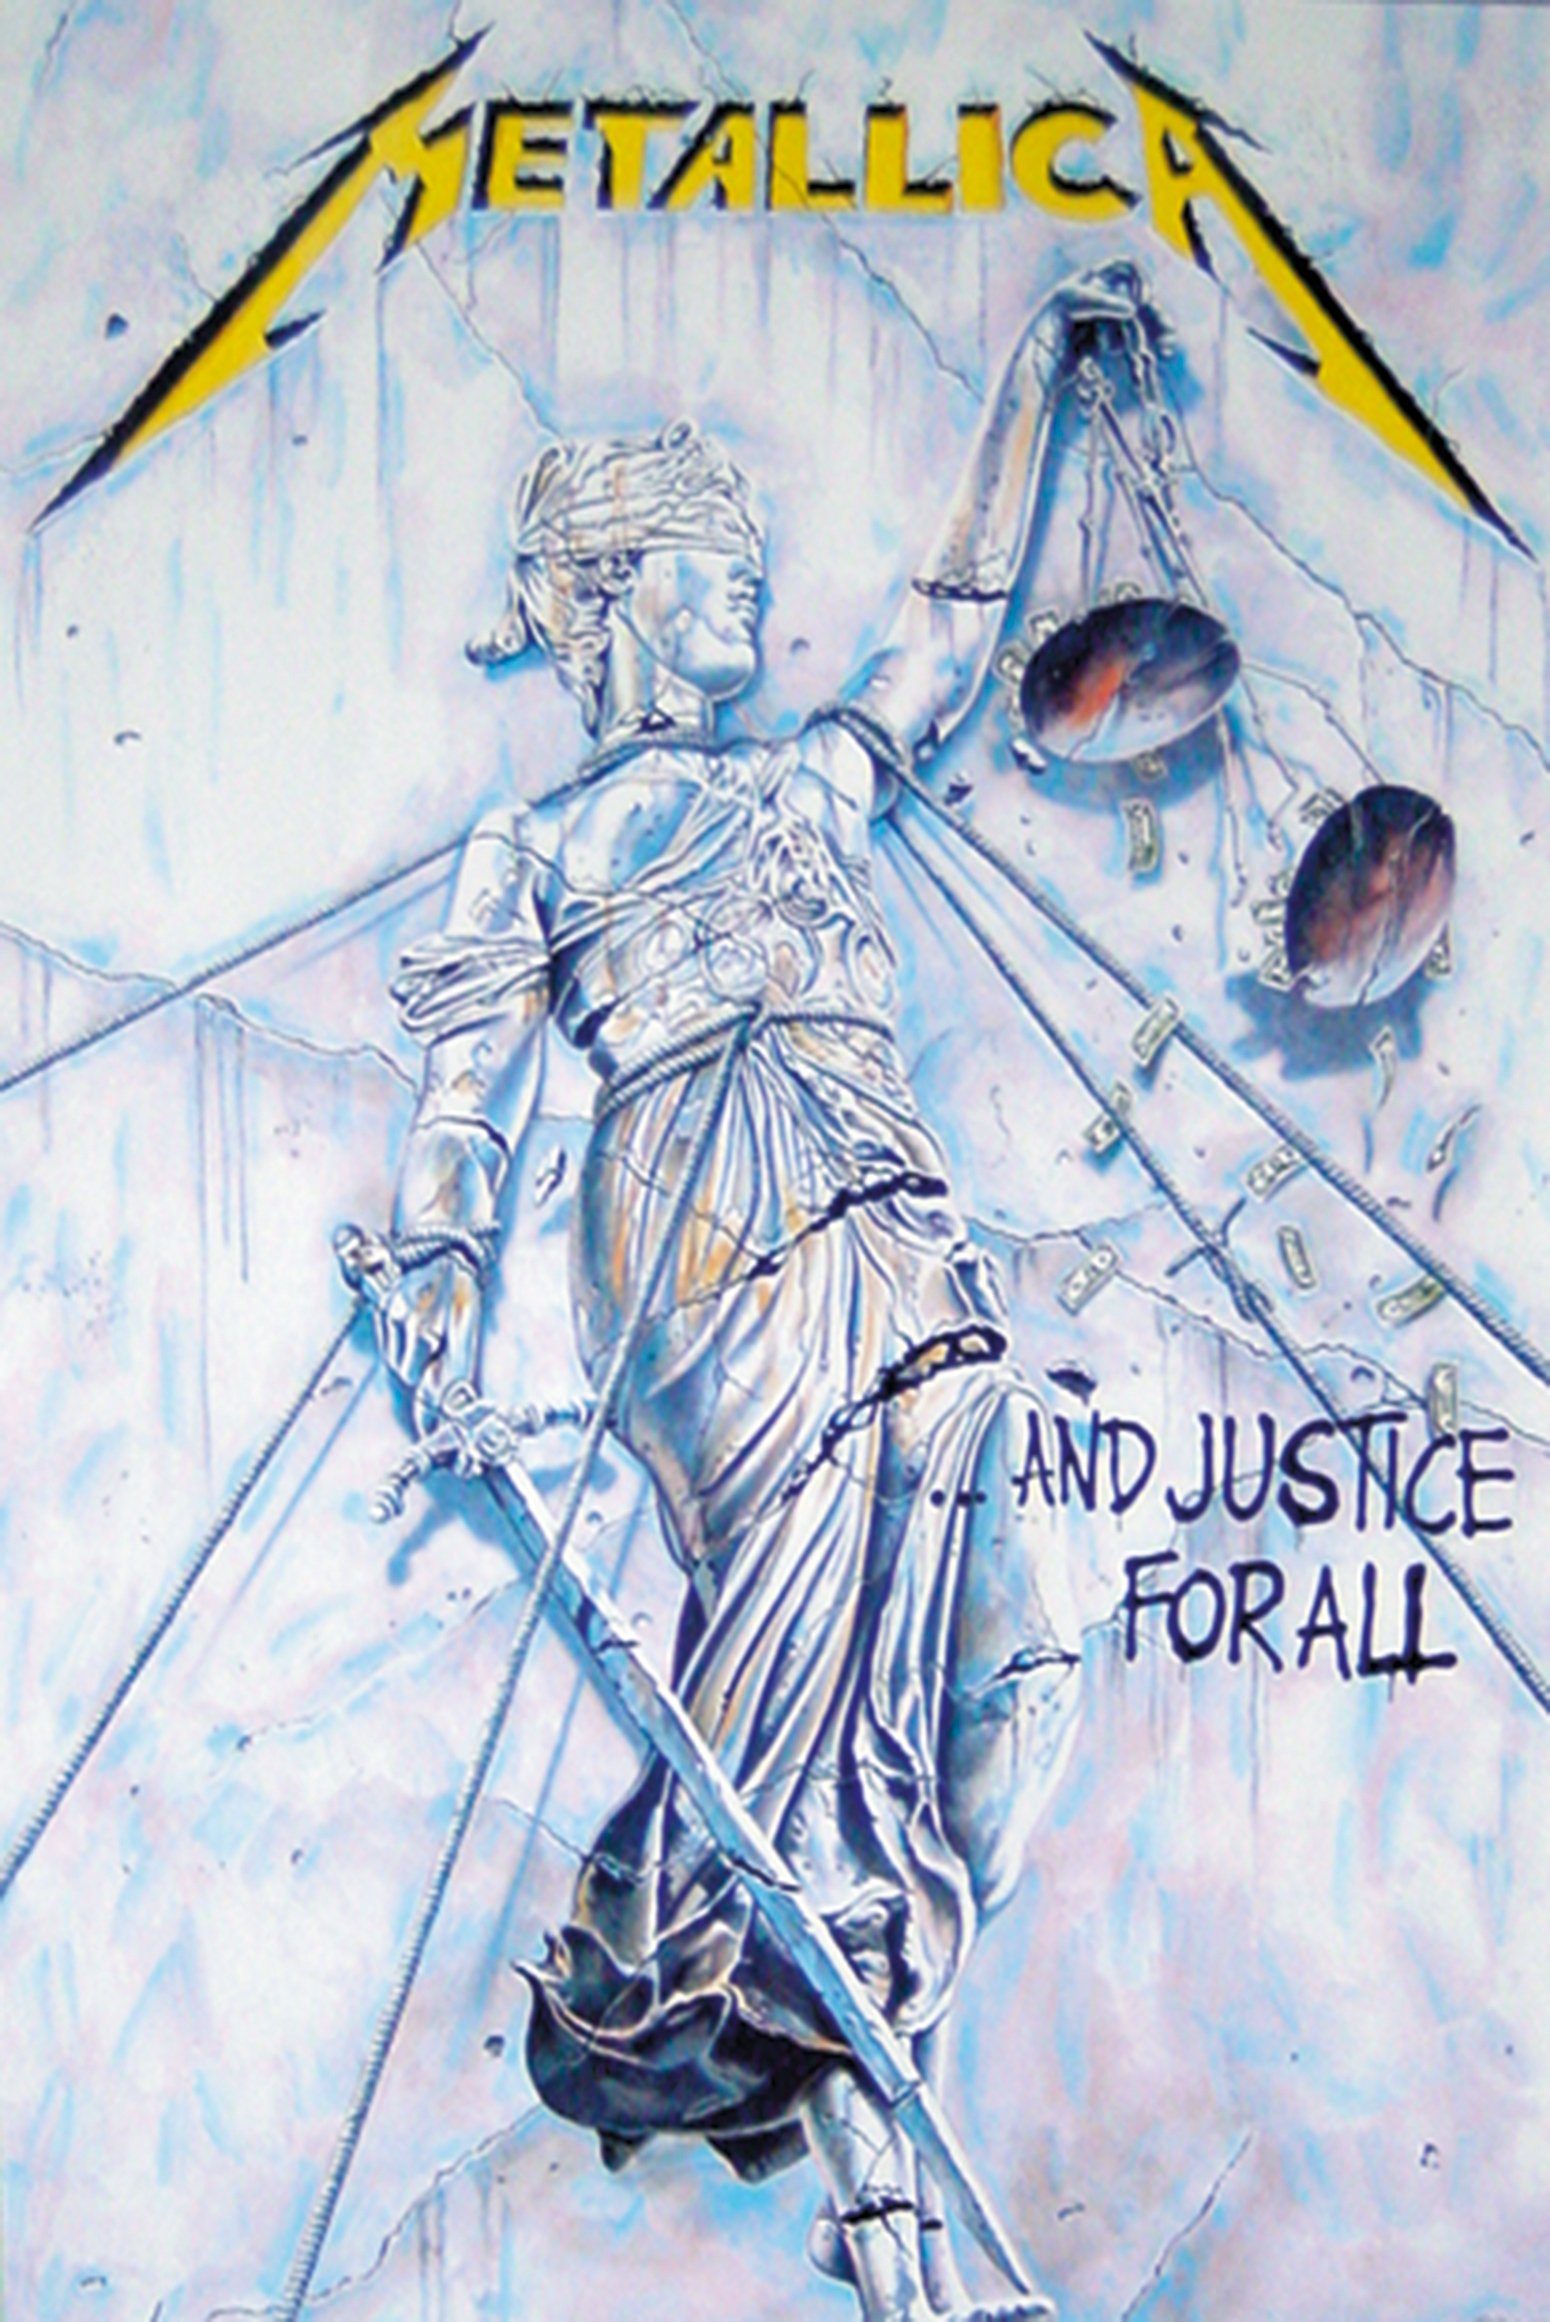 PYRAMID Poster Metallica Poster And Justice For All 61 x 91,5 cm